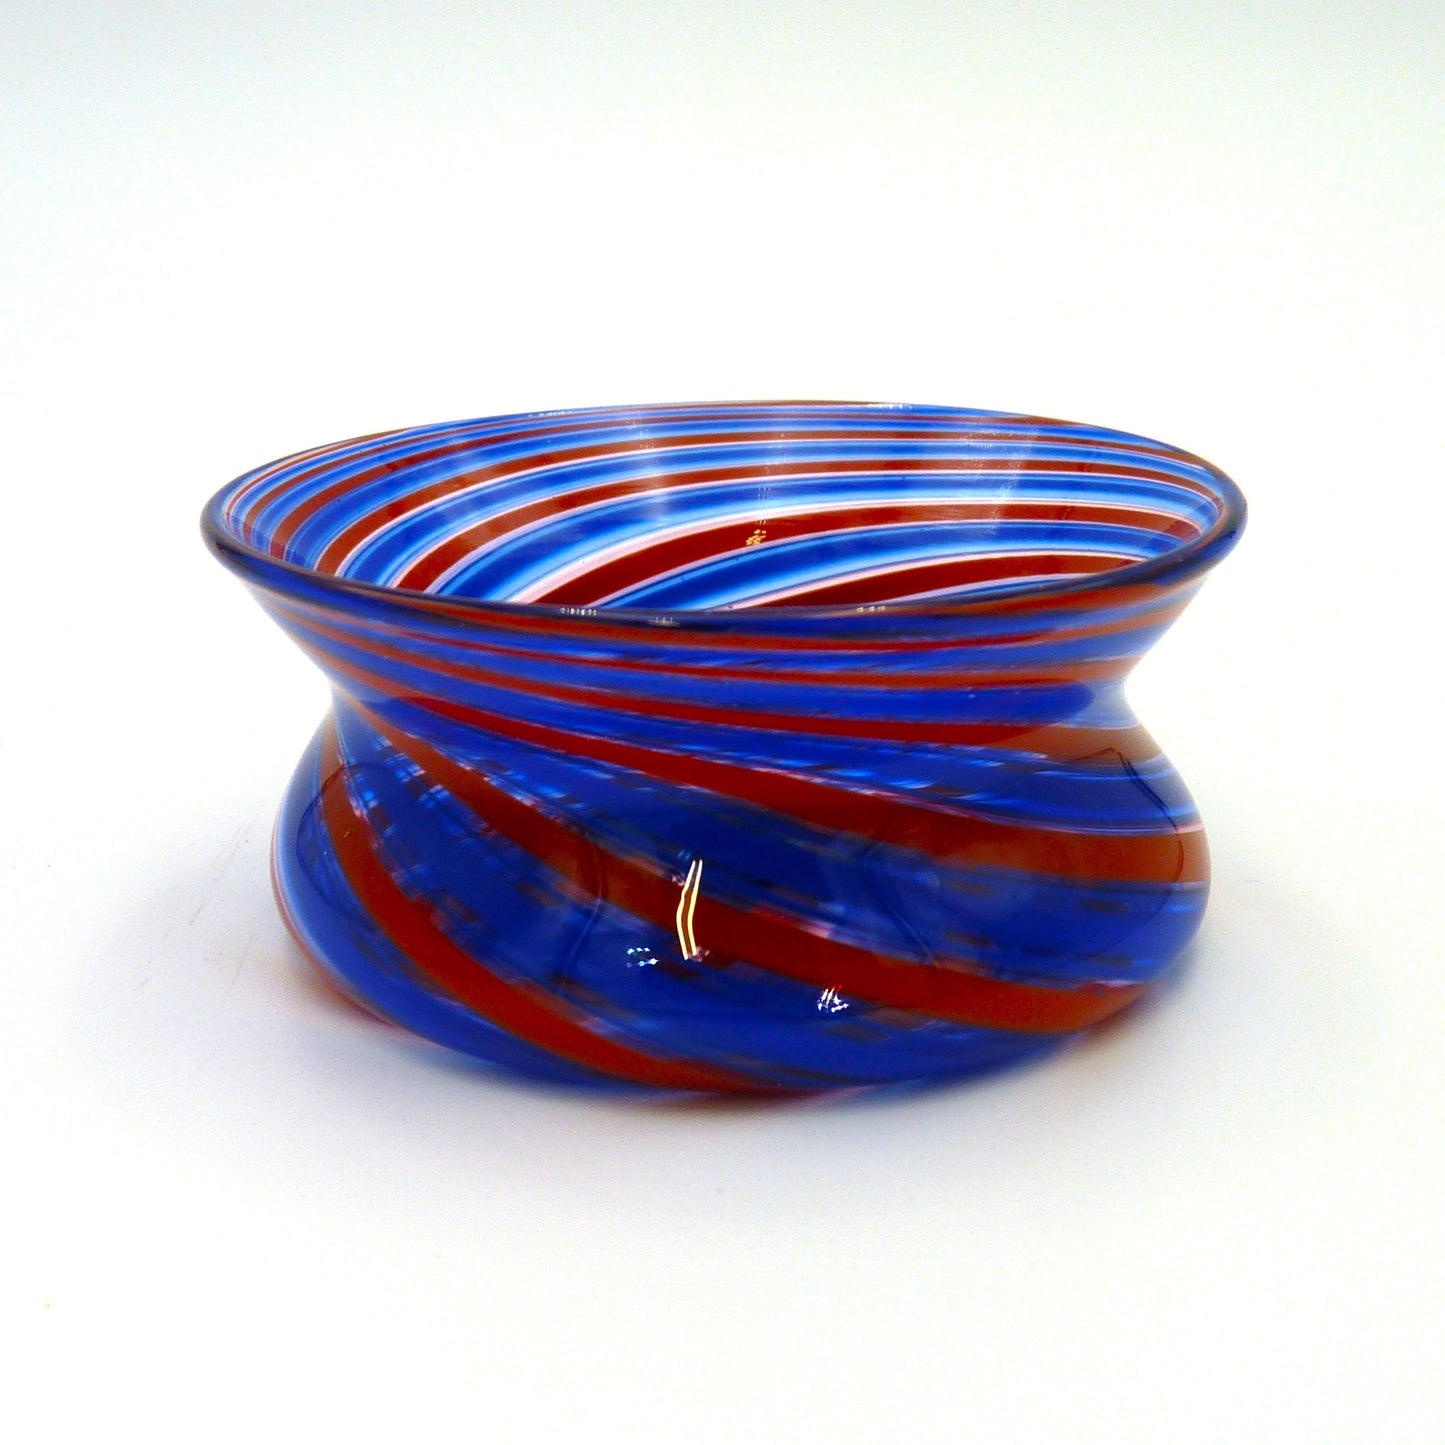 Salt Dish Blue and Red